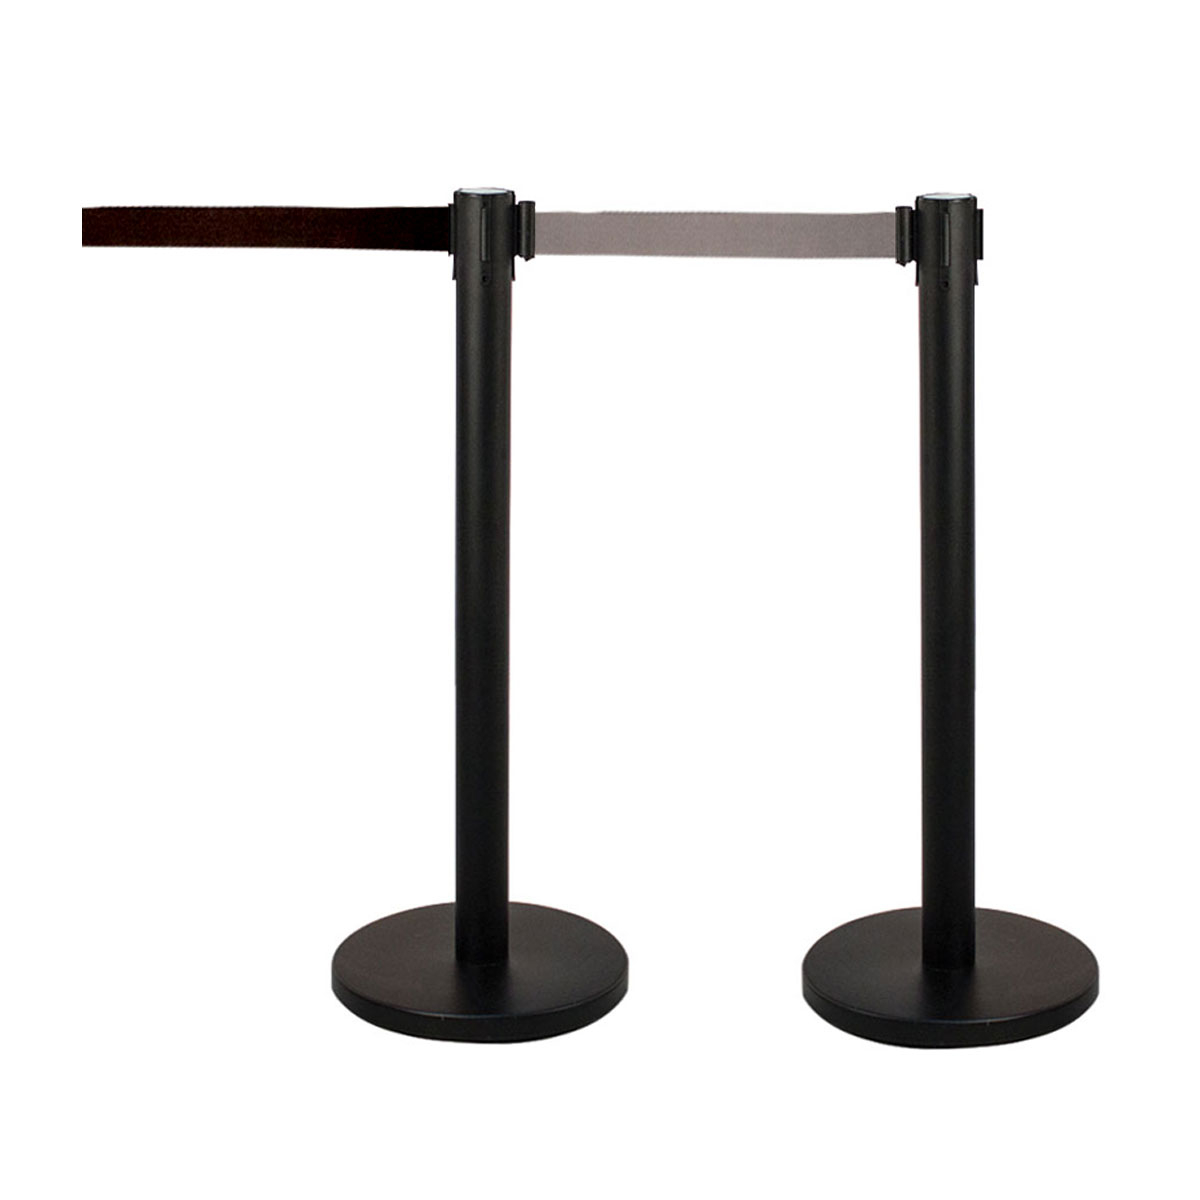 Retractable Stanchion Barriers With Black Posts And Black or Grey Belts